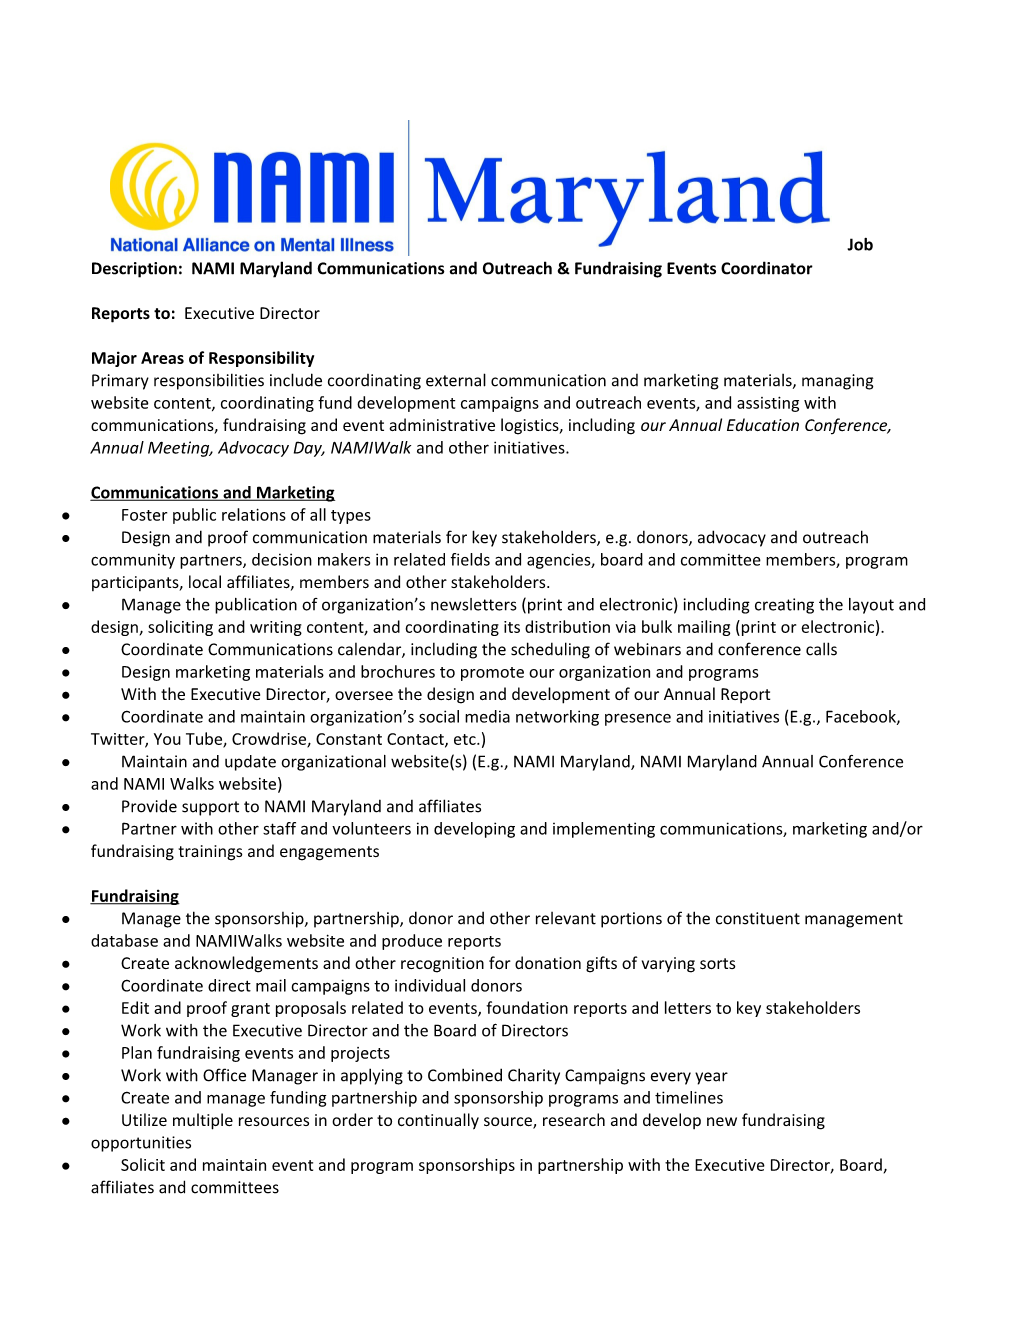 Job Description: NAMI Maryland Communications and Outreach & Fundraising Events Coordinator